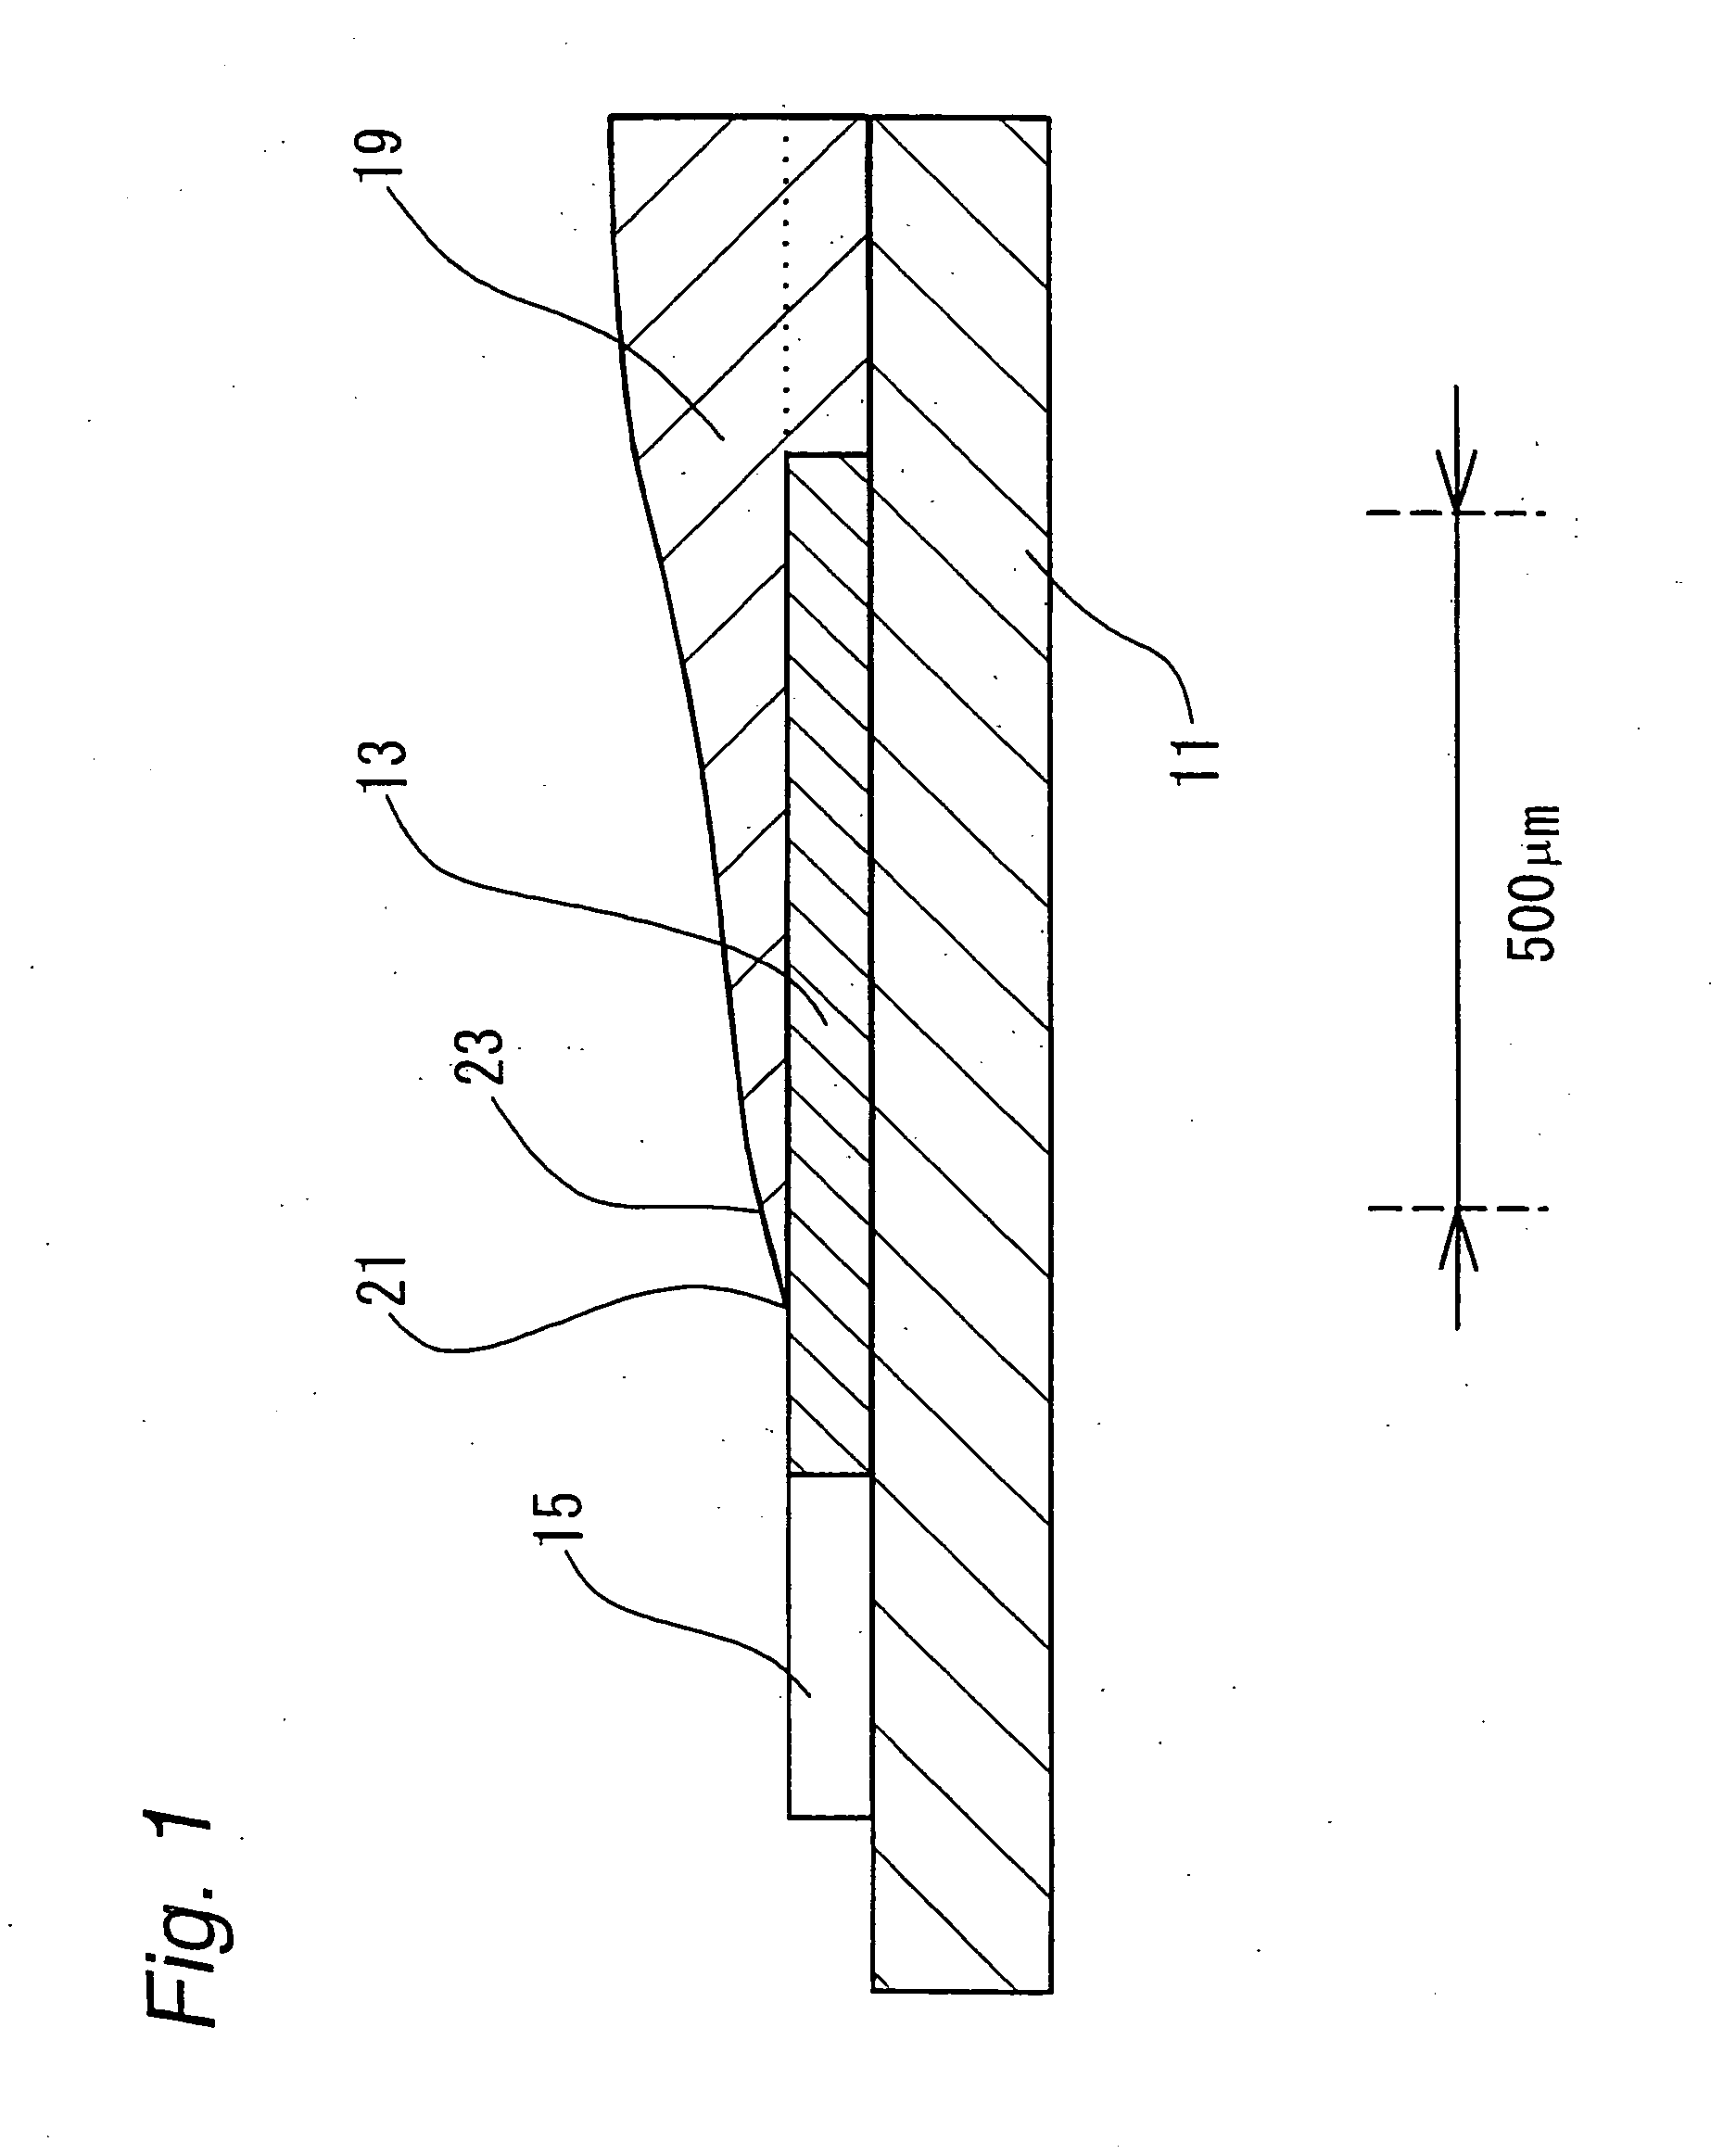 Printed wiring board and semiconductor device